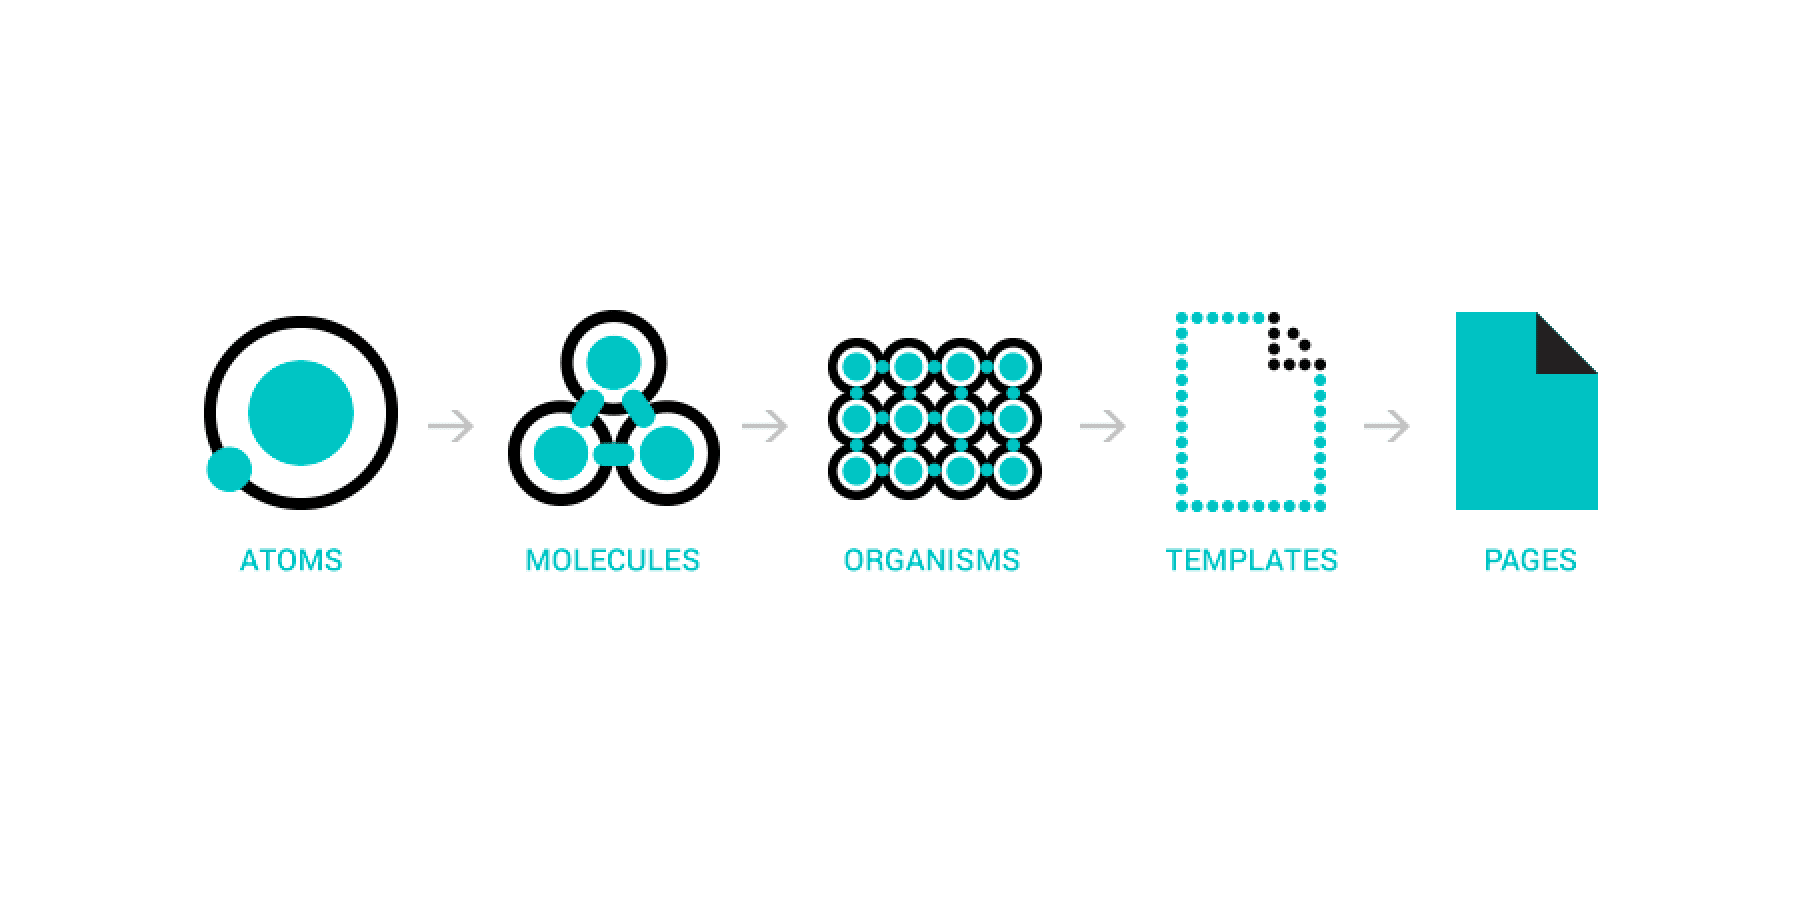 4 things you need to know about Atomic Design